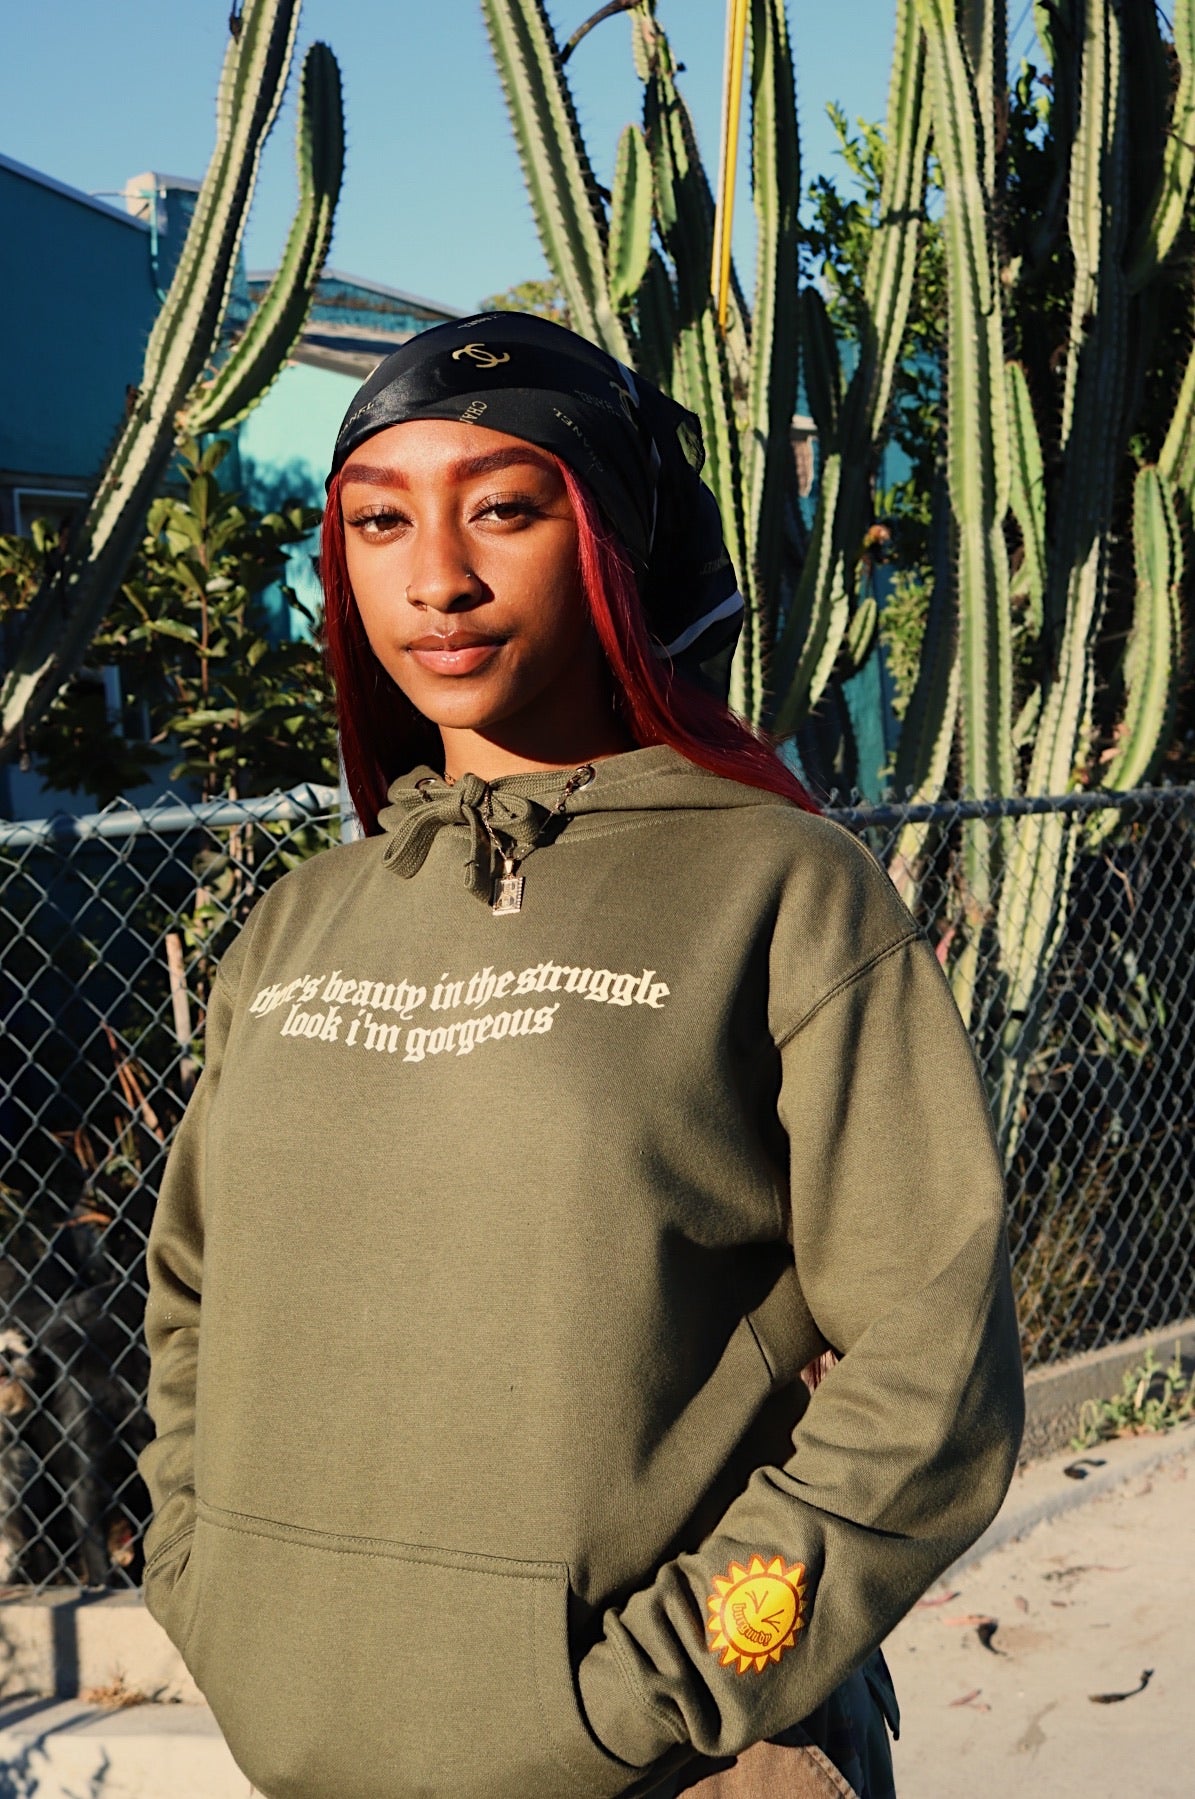 *“THERE’S BEAUTY IN THE STRUGGLE, LOOK I’M GORGEOUS” HOODIE